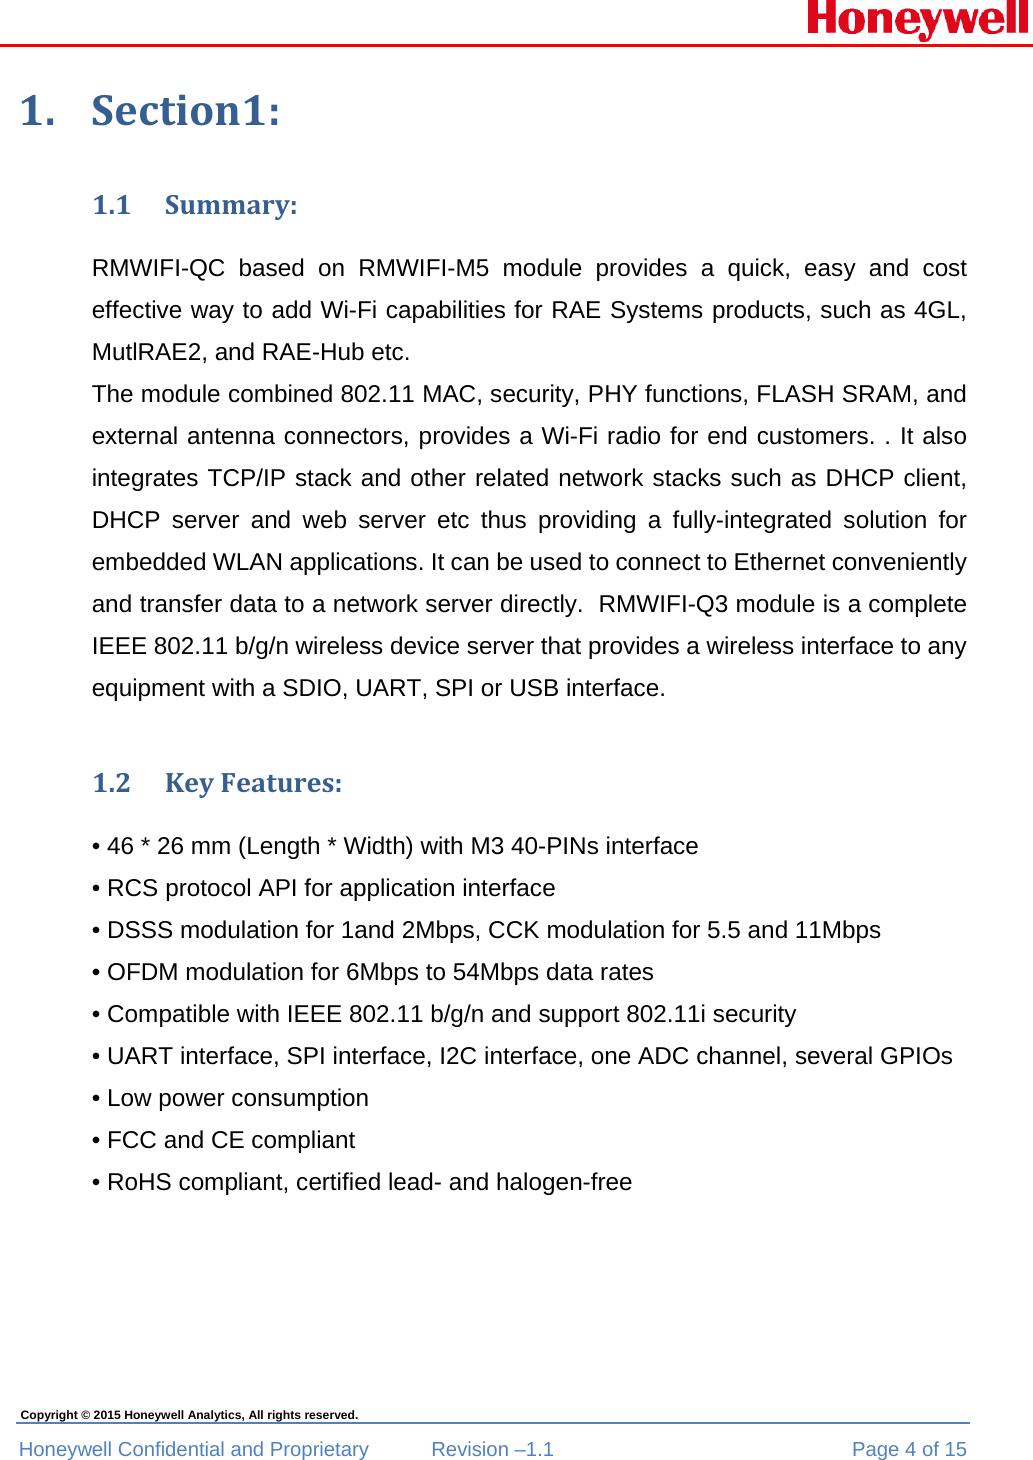  Honeywell Confidential and Proprietary  Revision –1.1  Page 4 of 15 Copyright © 2015 Honeywell Analytics, All rights reserved. 1. Section1:1.1 Summary:RMWIFI-QC based on RMWIFI-M5 module provides a quick, easy and cost effective way to add Wi-Fi capabilities for RAE Systems products, such as 4GL, MutlRAE2, and RAE-Hub etc.  The module combined 802.11 MAC, security, PHY functions, FLASH SRAM, and external antenna connectors, provides a Wi-Fi radio for end customers. . It also integrates TCP/IP stack and other related network stacks such as DHCP client, DHCP server and web server etc thus providing a fully-integrated solution for embedded WLAN applications. It can be used to connect to Ethernet conveniently and transfer data to a network server directly.  RMWIFI-Q3 module is a complete IEEE 802.11 b/g/n wireless device server that provides a wireless interface to any equipment with a SDIO, UART, SPI or USB interface. 1.2 KeyFeatures:• 46 * 26 mm (Length * Width) with M3 40-PINs interface • RCS protocol API for application interface • DSSS modulation for 1and 2Mbps, CCK modulation for 5.5 and 11Mbps • OFDM modulation for 6Mbps to 54Mbps data rates • Compatible with IEEE 802.11 b/g/n and support 802.11i security • UART interface, SPI interface, I2C interface, one ADC channel, several GPIOs • Low power consumption • FCC and CE compliant • RoHS compliant, certified lead- and halogen-free  